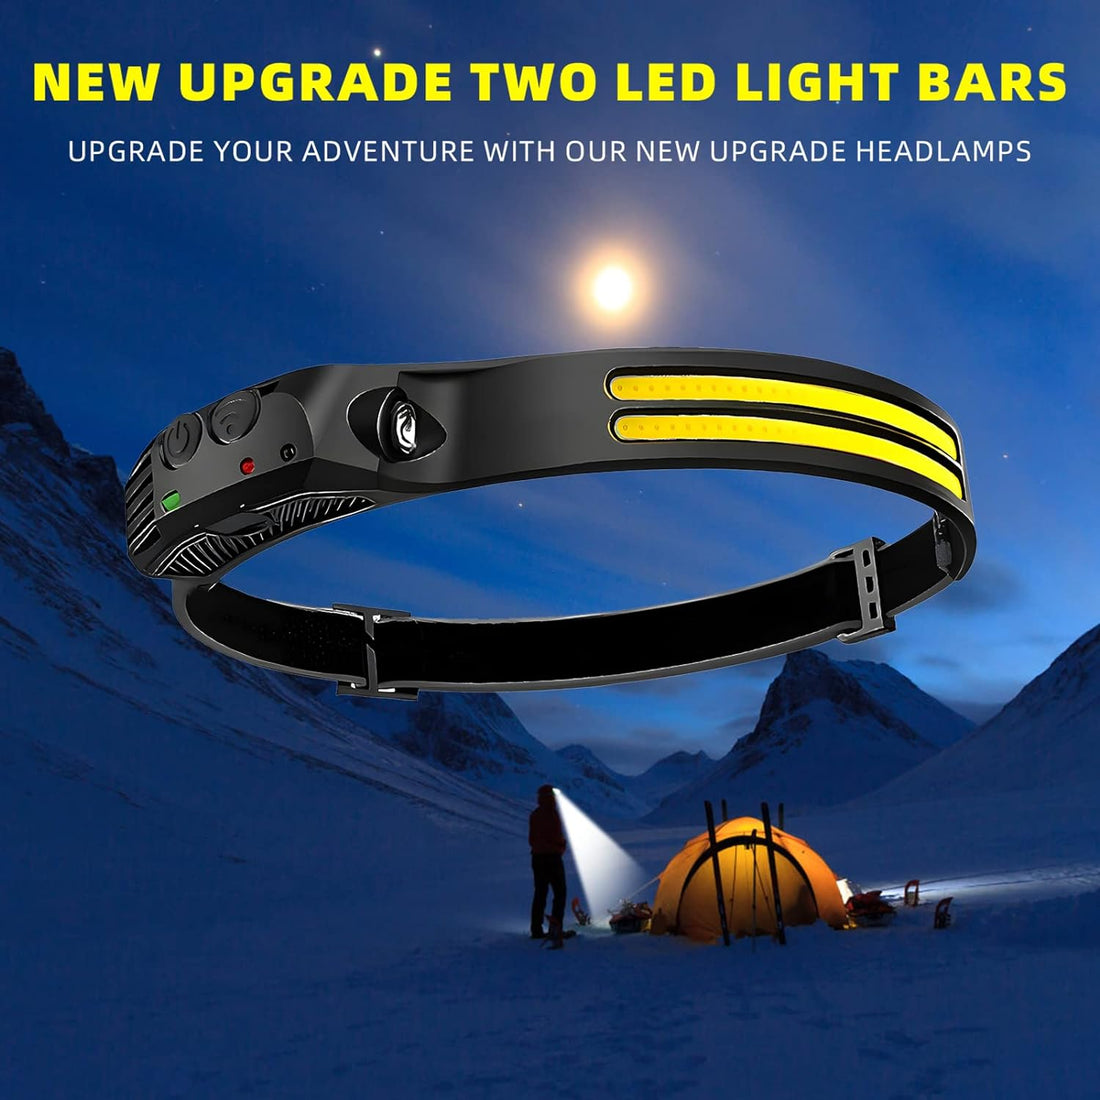 LED Headlamp Rechargeable 1PCS - 230° COB Super Bright Head Lights for Forehead, Hard hat Light for Adults, USB C Headband Flashlight for Working, Hiking, Running, Camping Essentials Accessories Gear